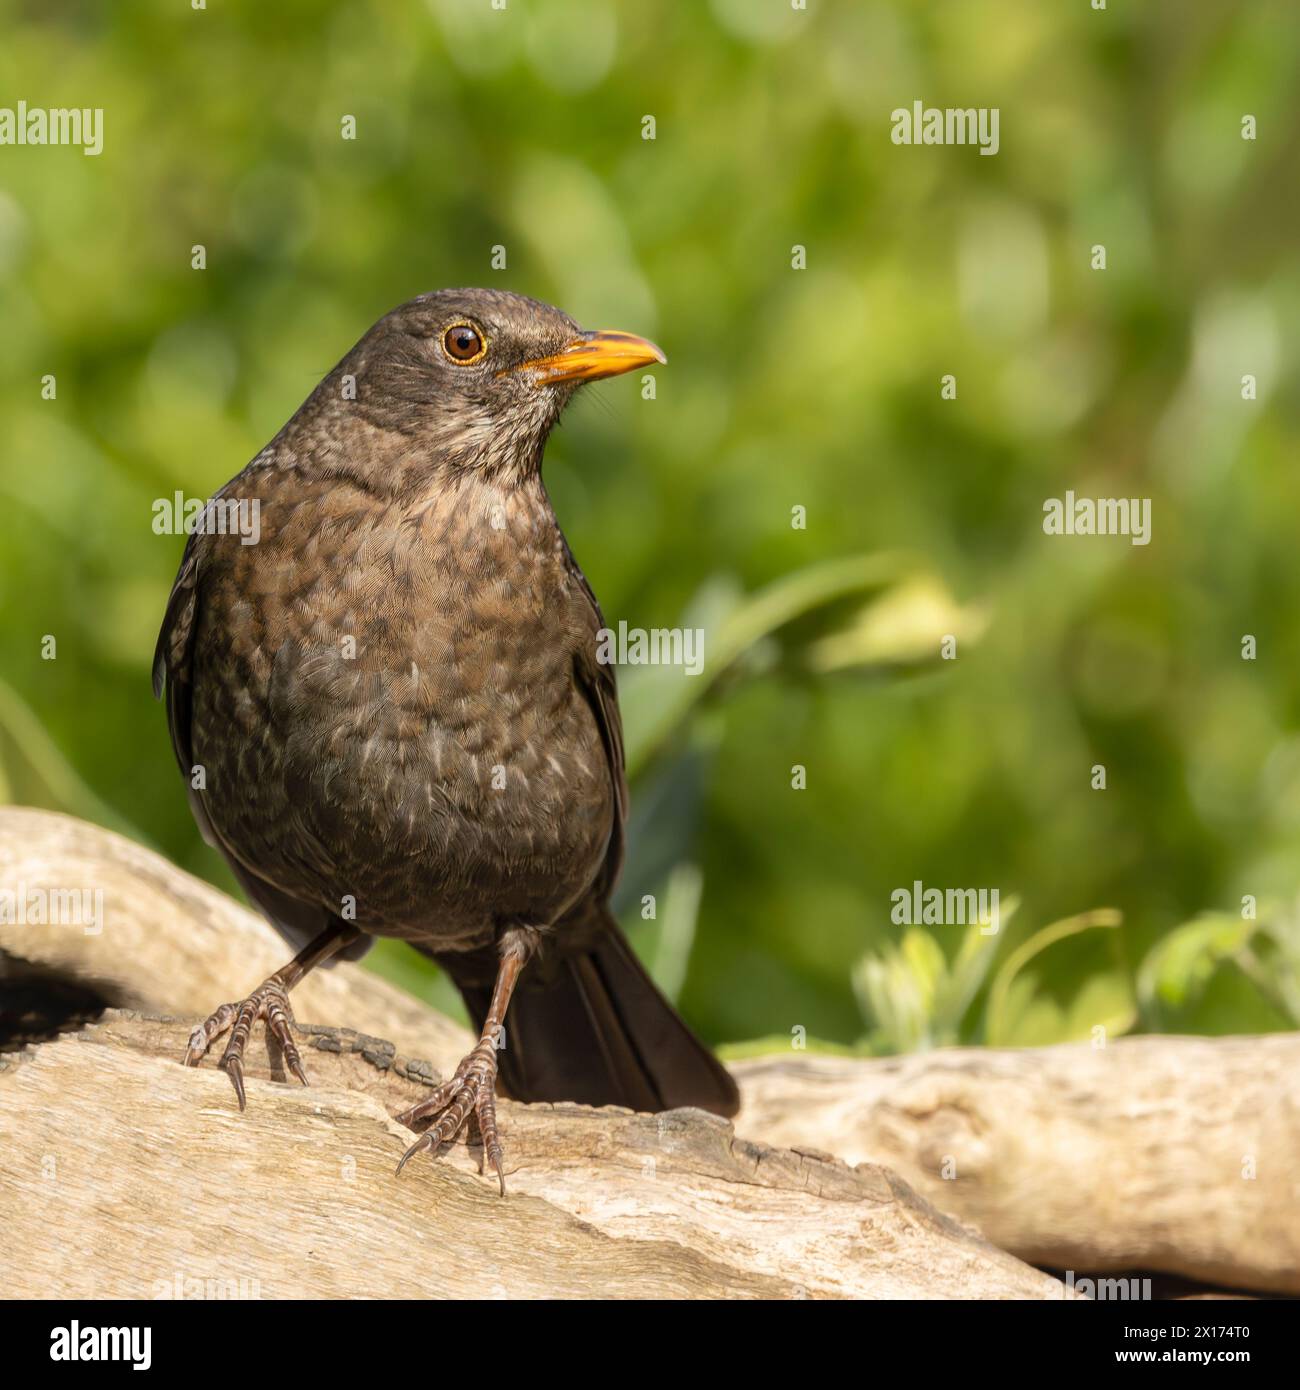 Blackbird, male and females, pictures taken in Bedfordshire, UK. Gardens and countryside Stock Photo